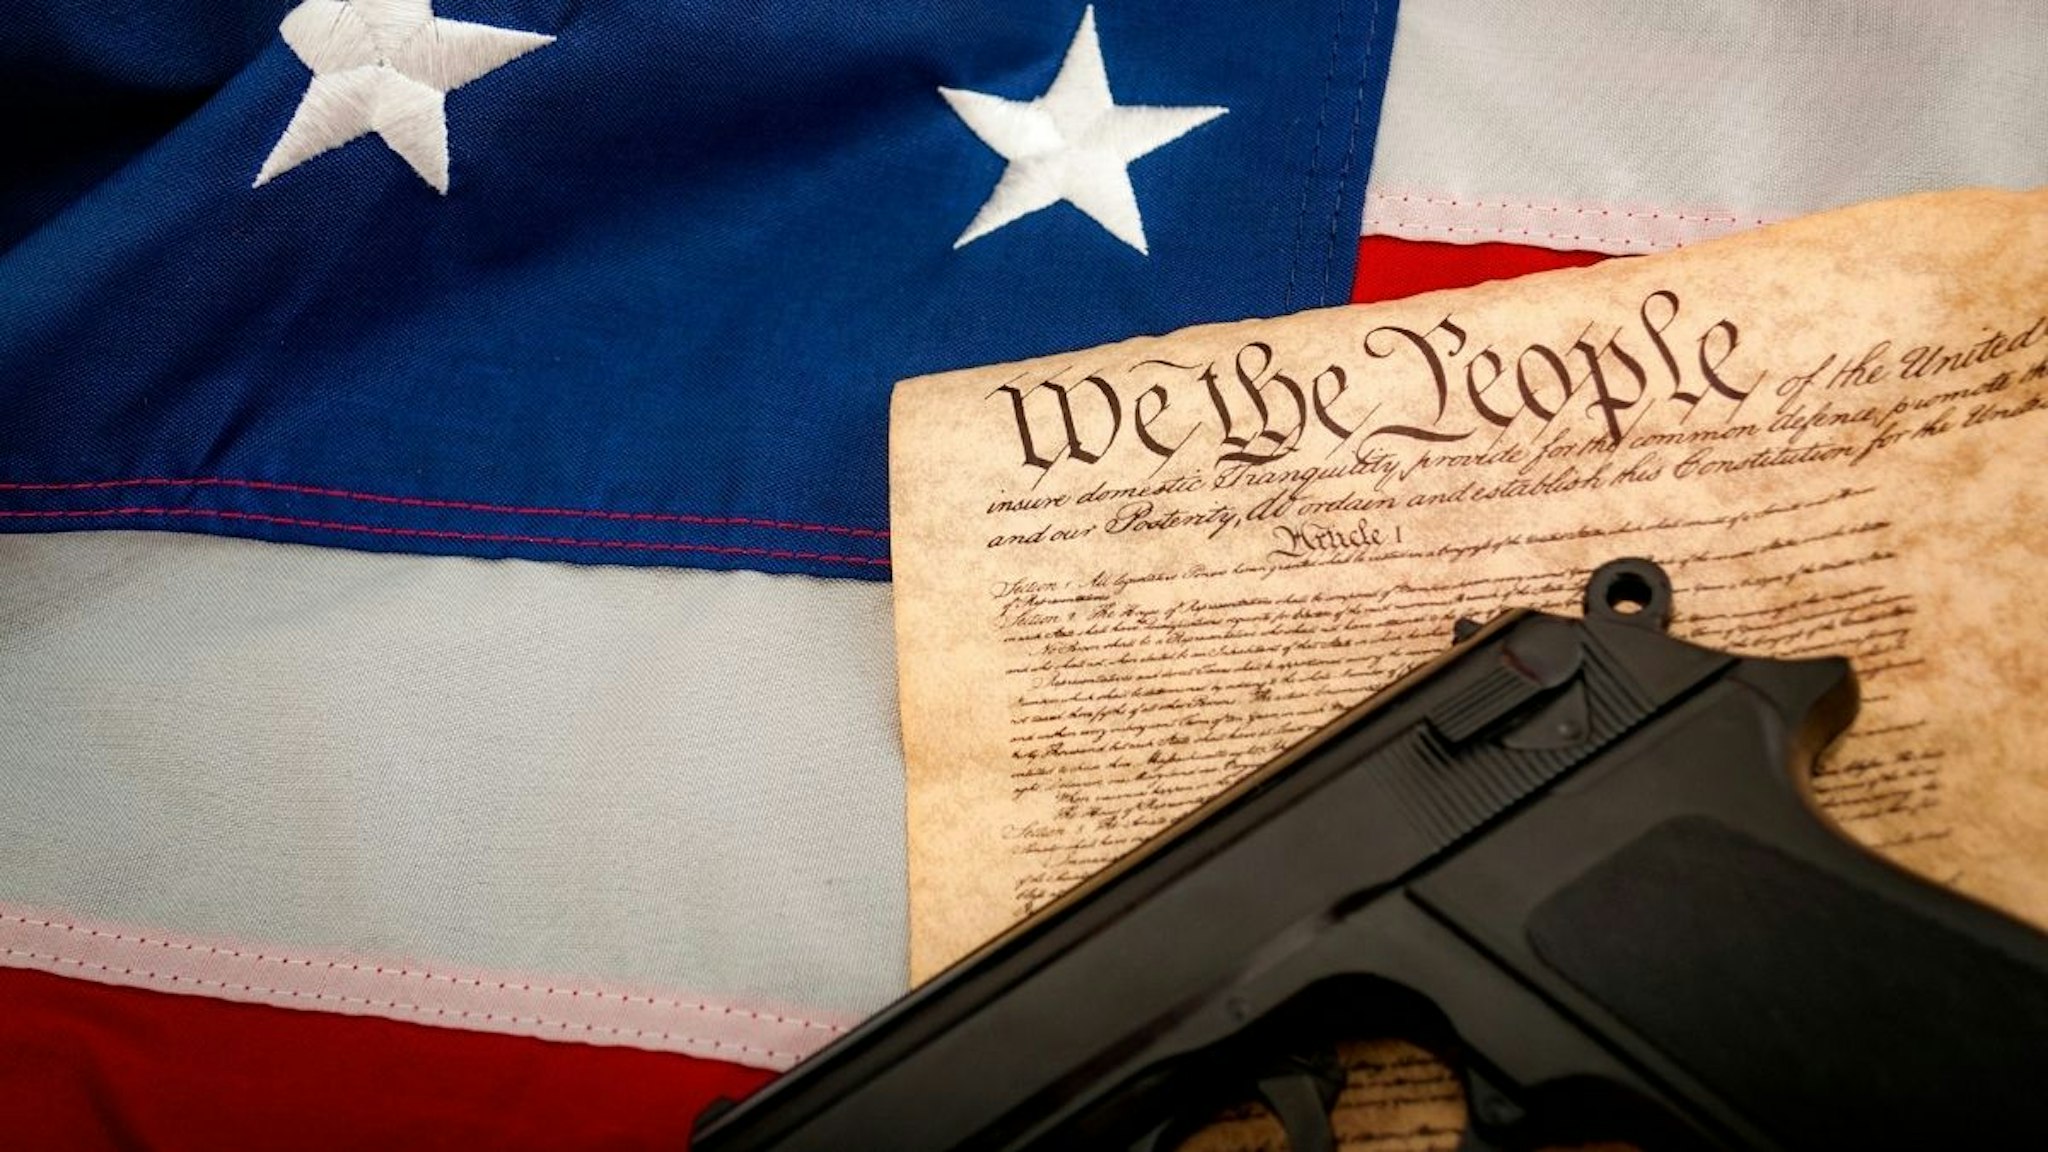 The Second Amendment (Amendment II) to the United States Constitution protects the right of the people to keep and bear arms and was adopted on December 15, 1791, as part of the first ten amendments contained in the Bill of Rights